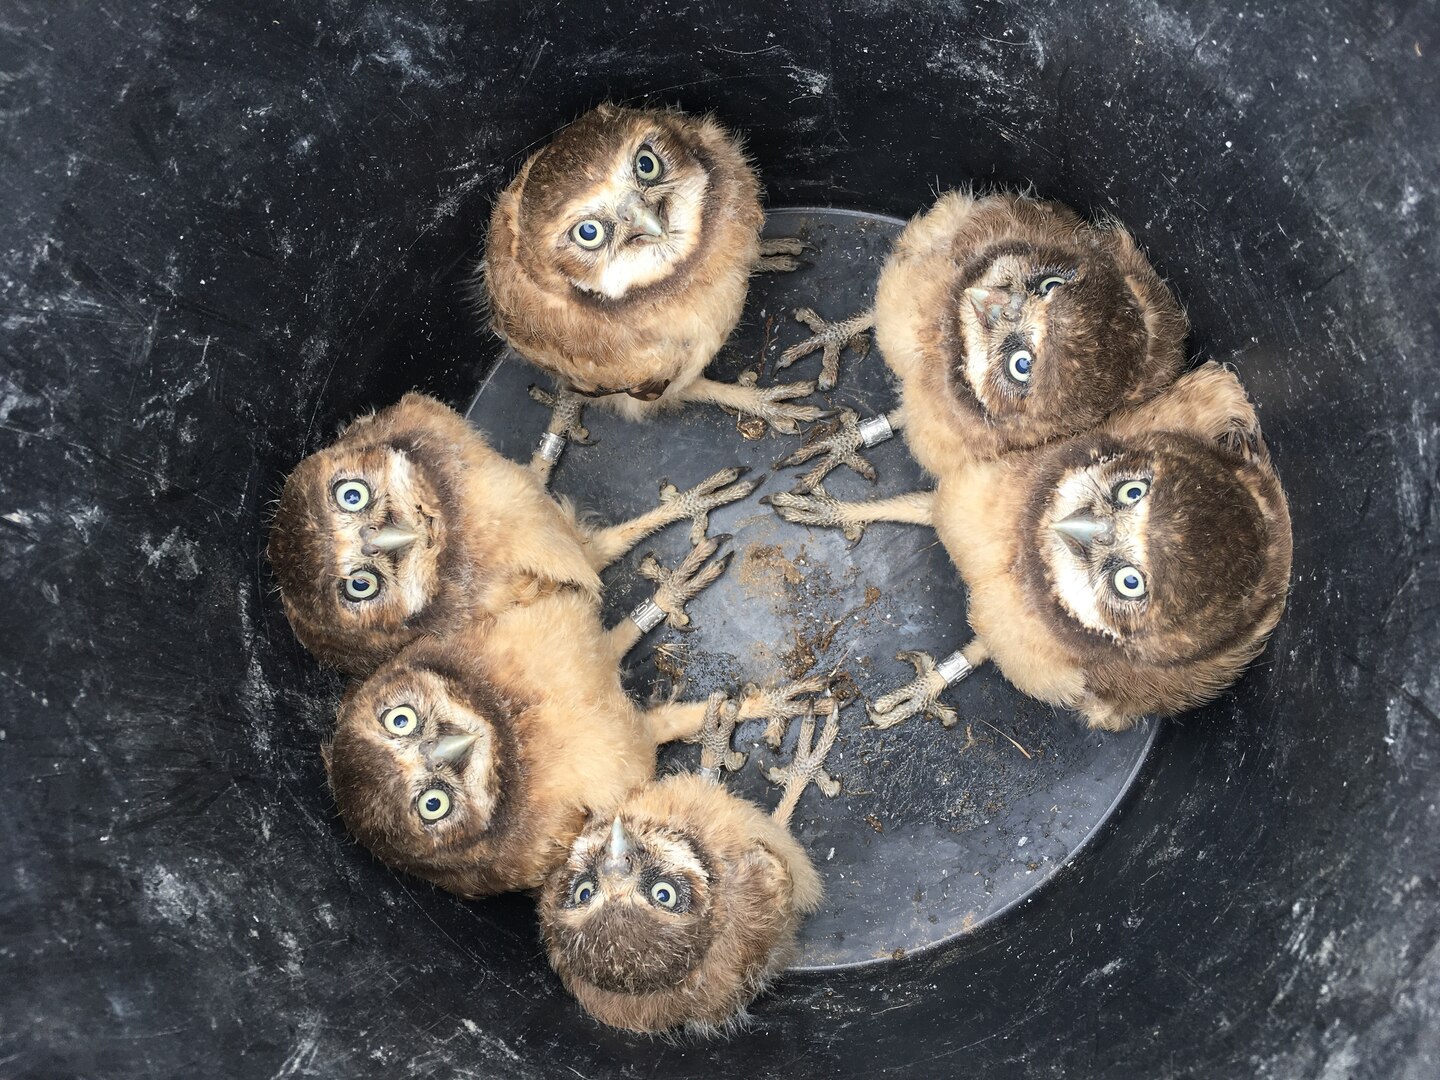 Burrowing owls at Camp Umatilla, Oregon, used by the National Guard for training.